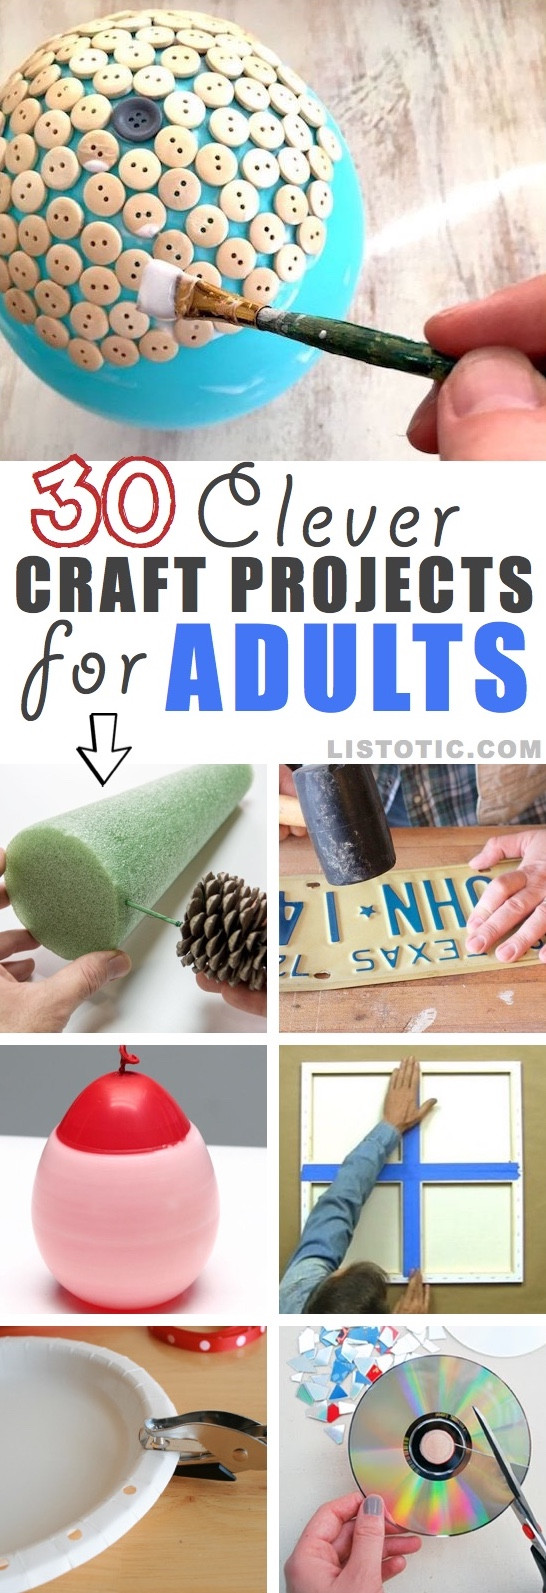 Easy Craft Ideas For Adults
 Easy DIY Craft Ideas That Will Spark Your Creativity for